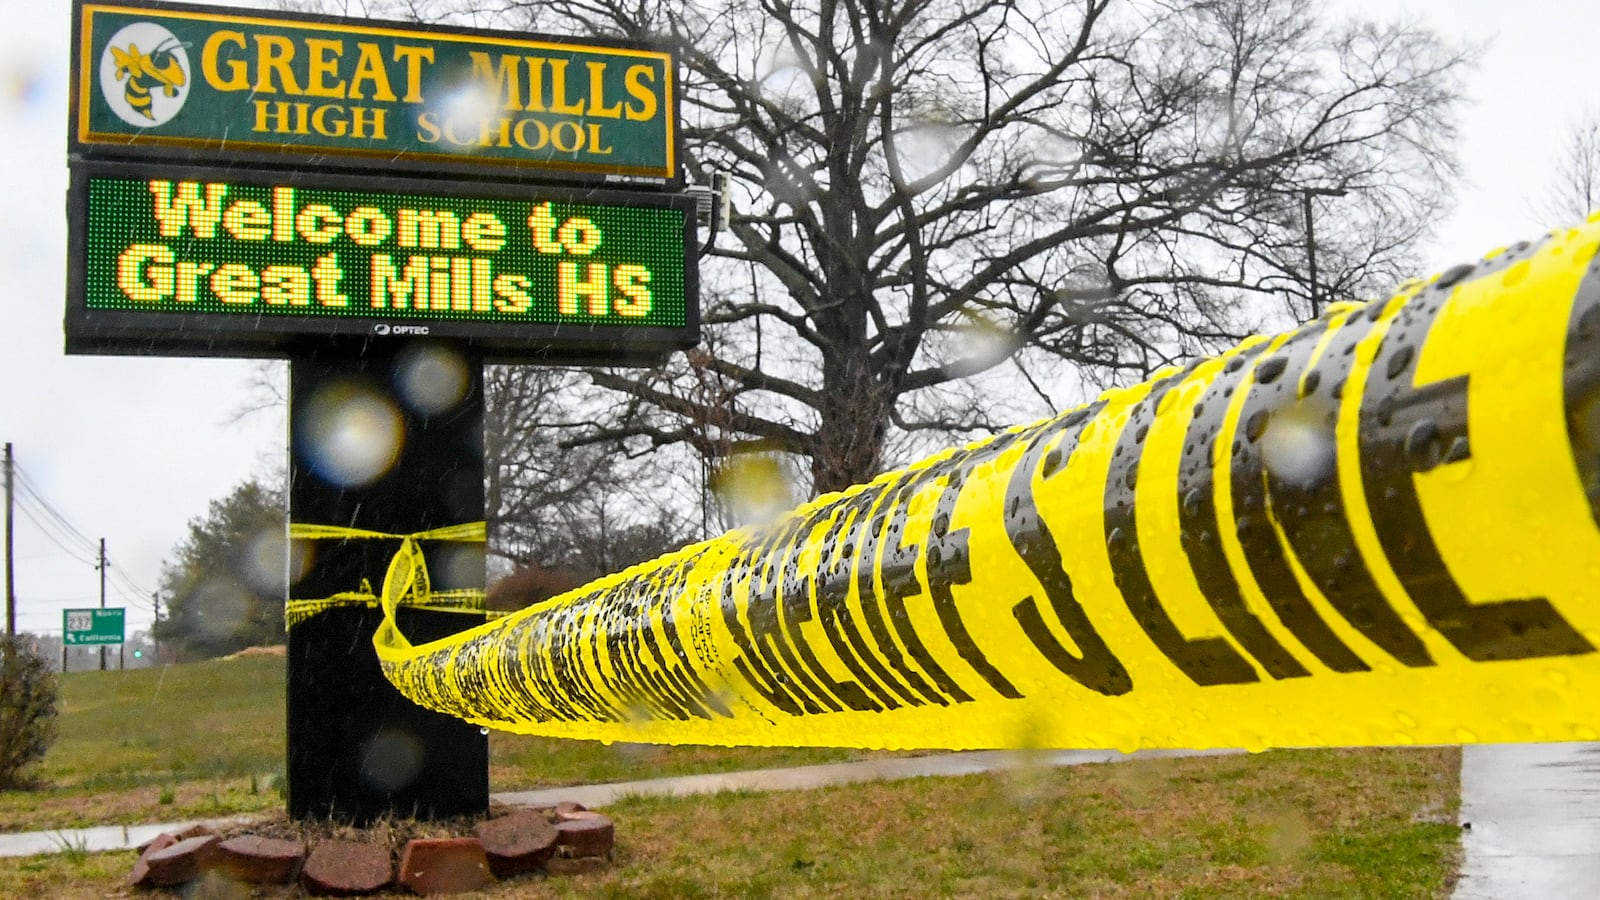 A green and yellow sign that says Great Mills High School. Near it is yellow police tape.